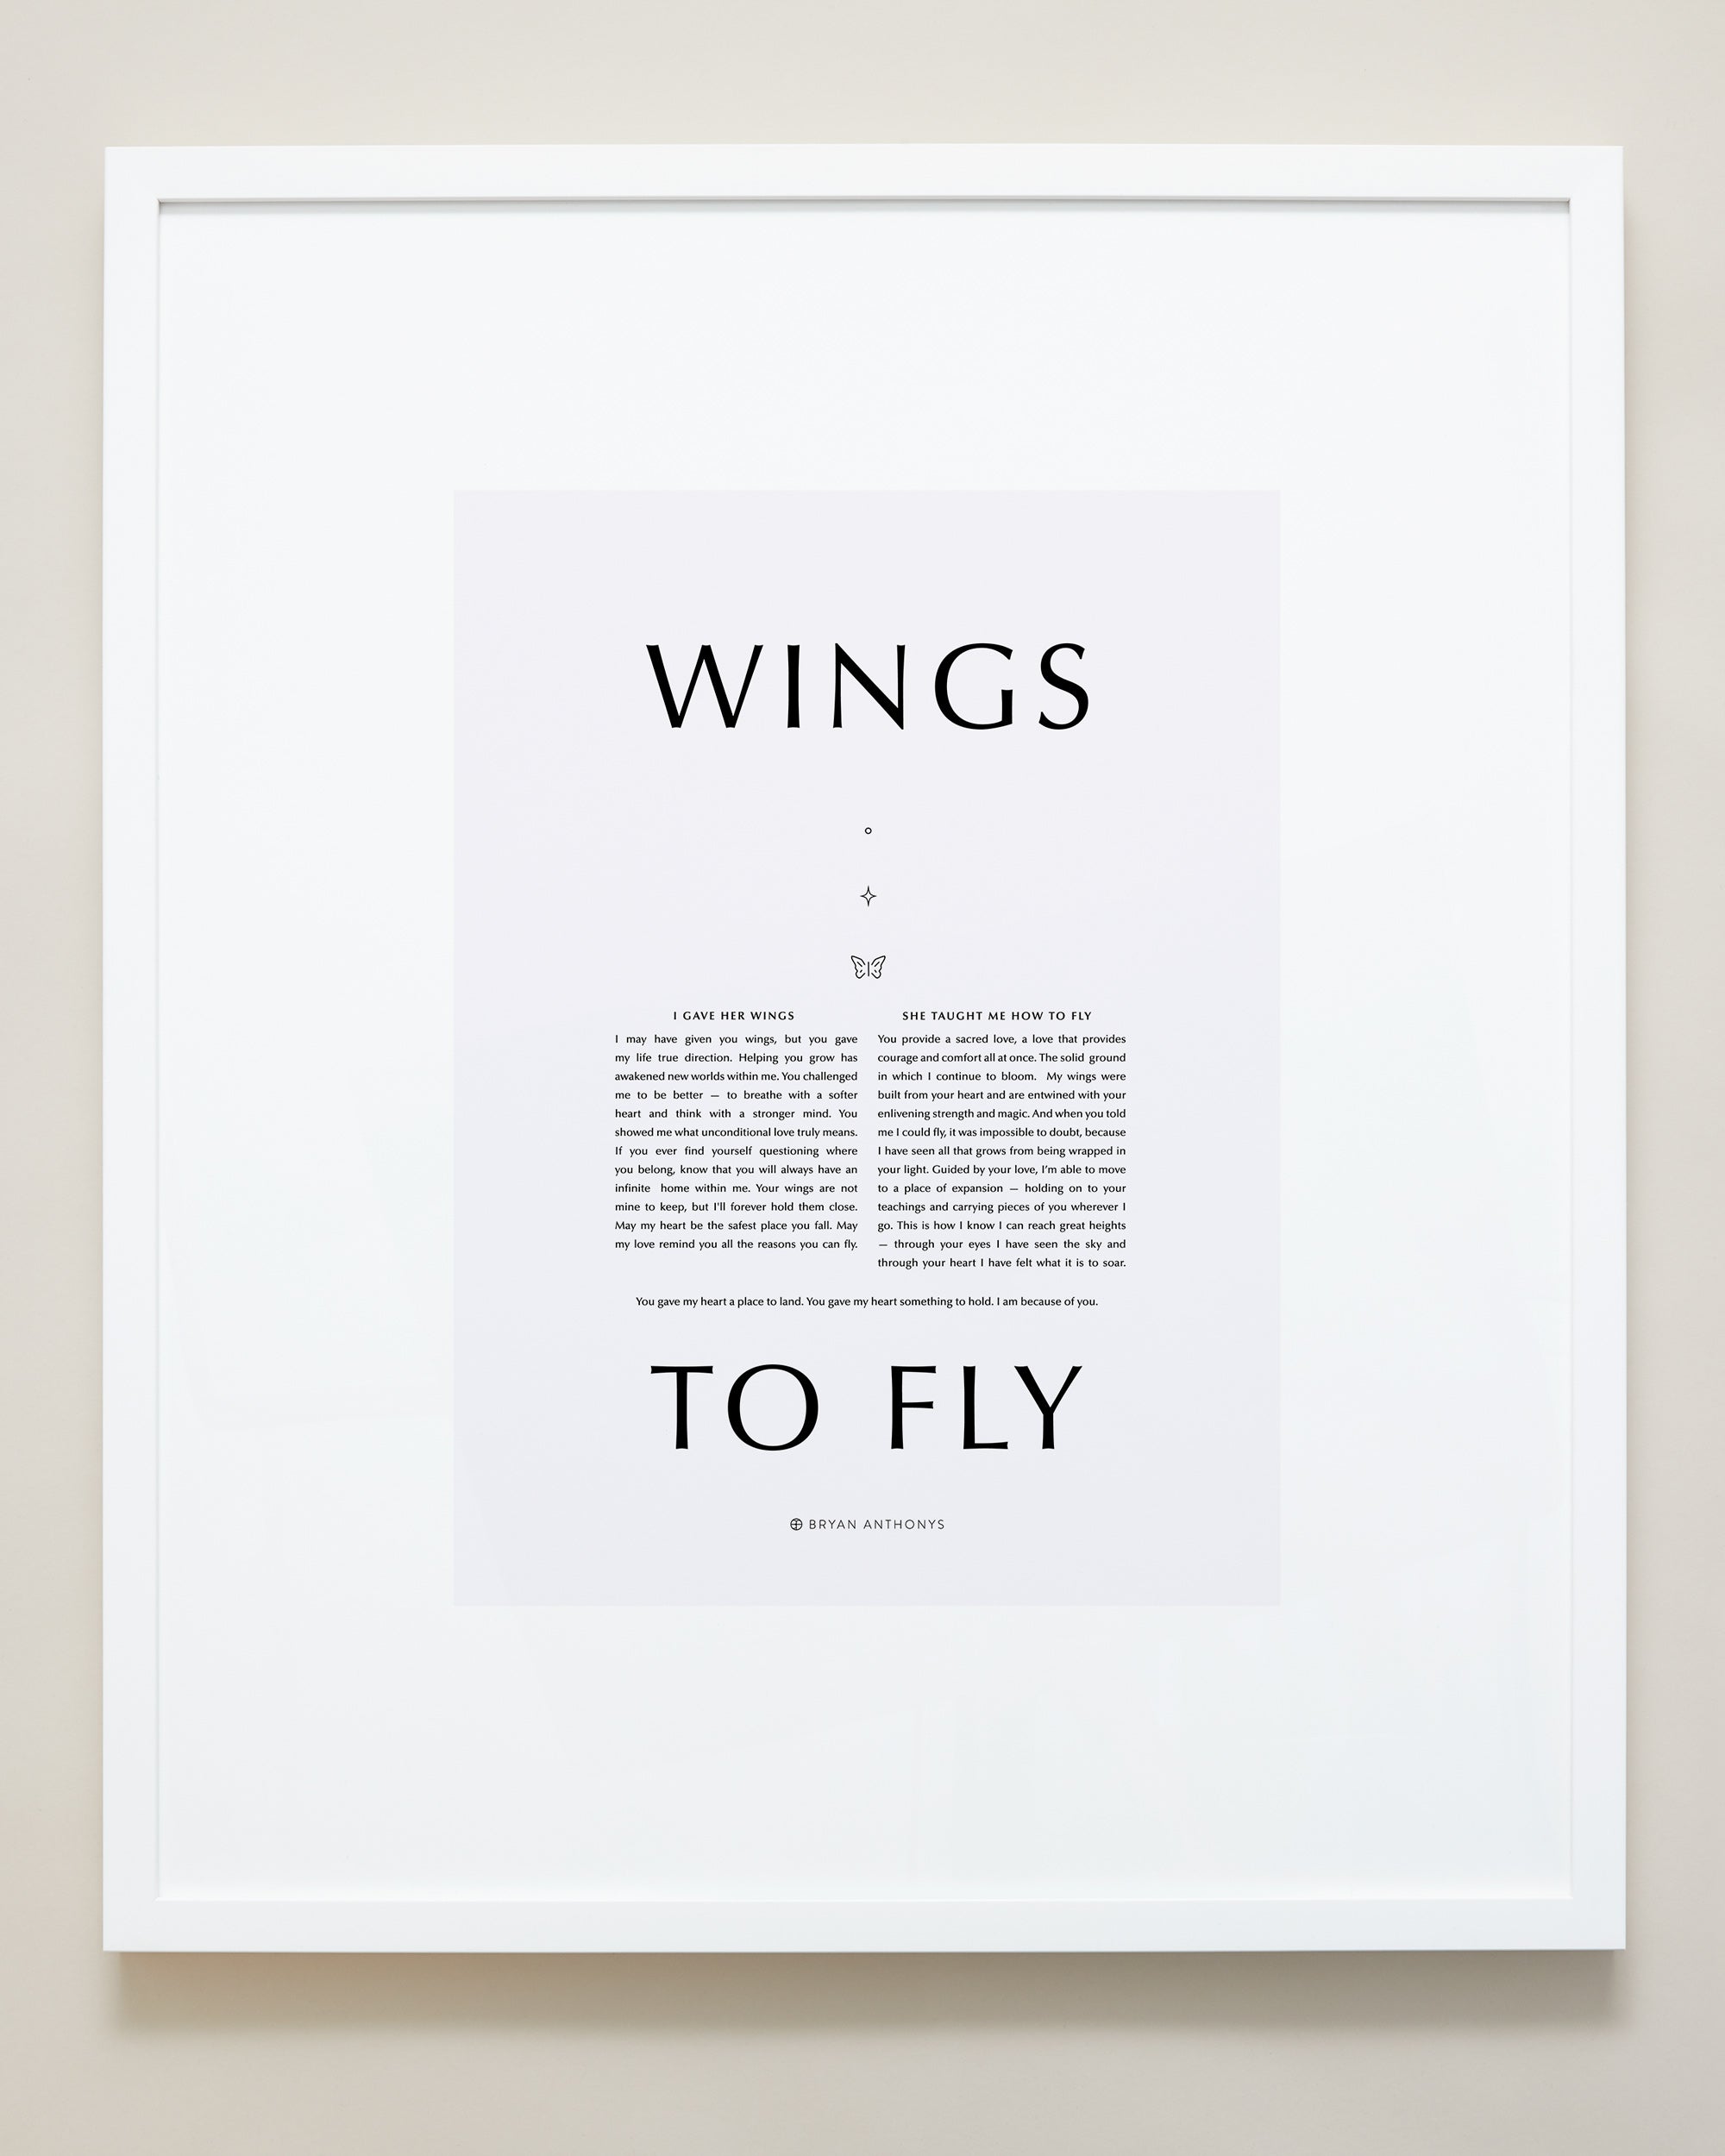 Bryan Anthonys Home Decor Wings To Fly Framed Print 20x24 White Frame with Gray